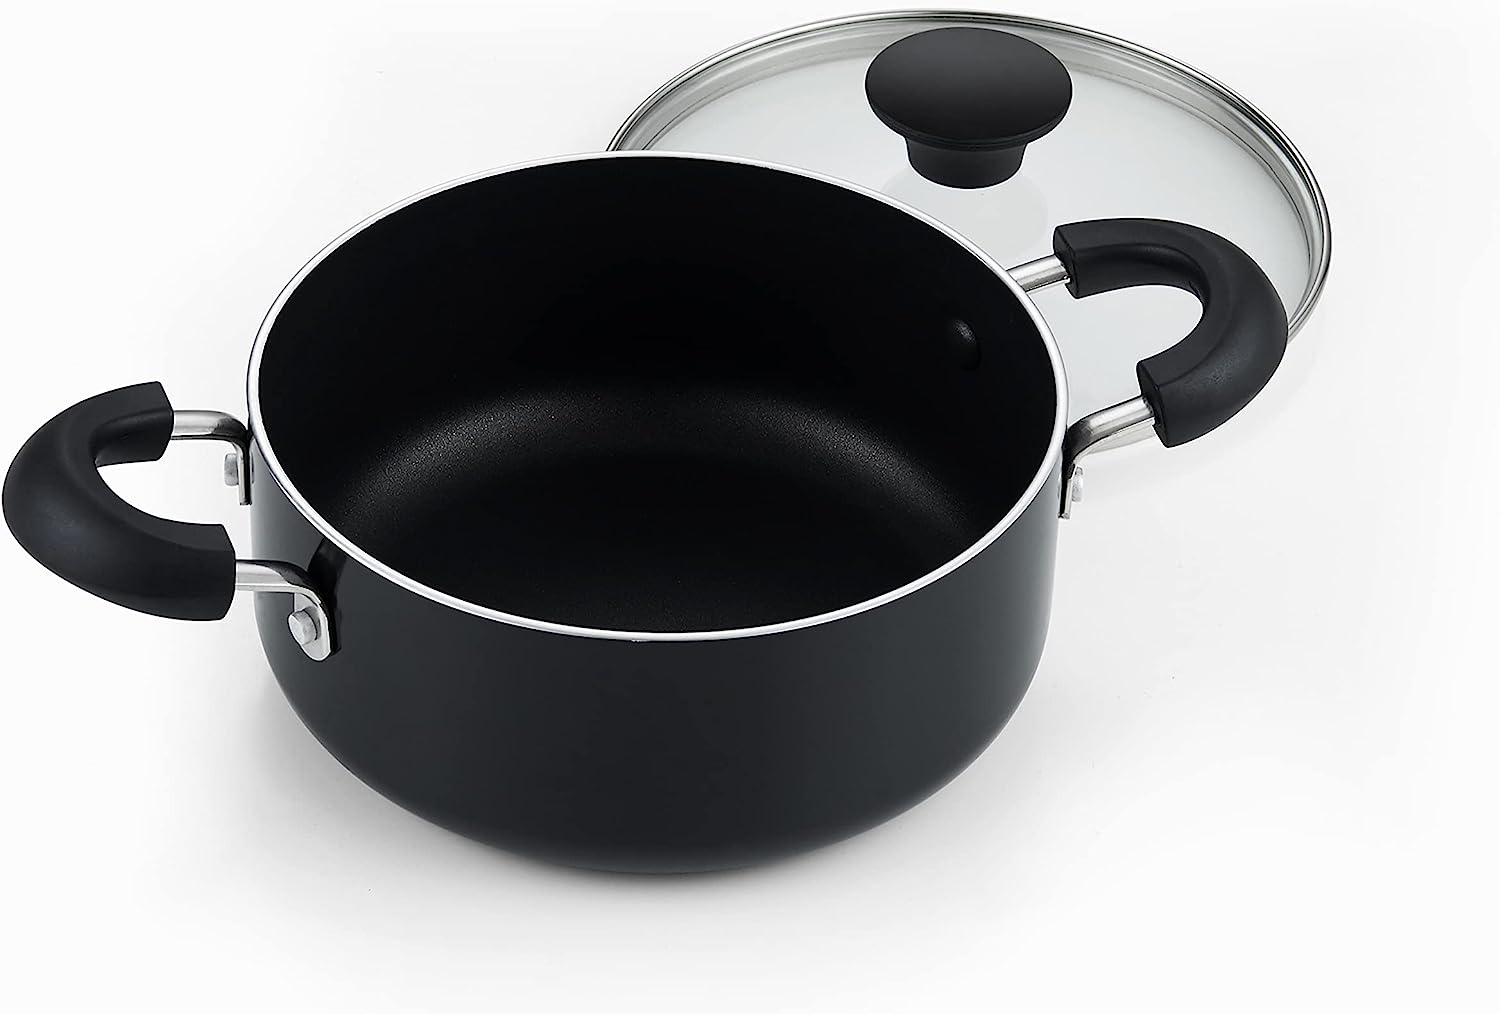 https://bigbigmart.com/wp-content/uploads/2023/06/Cook-N-Home-Non-Stick-Basic-Kitchen-Cookware-Pots-and-Pans-Set-Stay-Cool-Handle-Black-8-Piece6.jpg